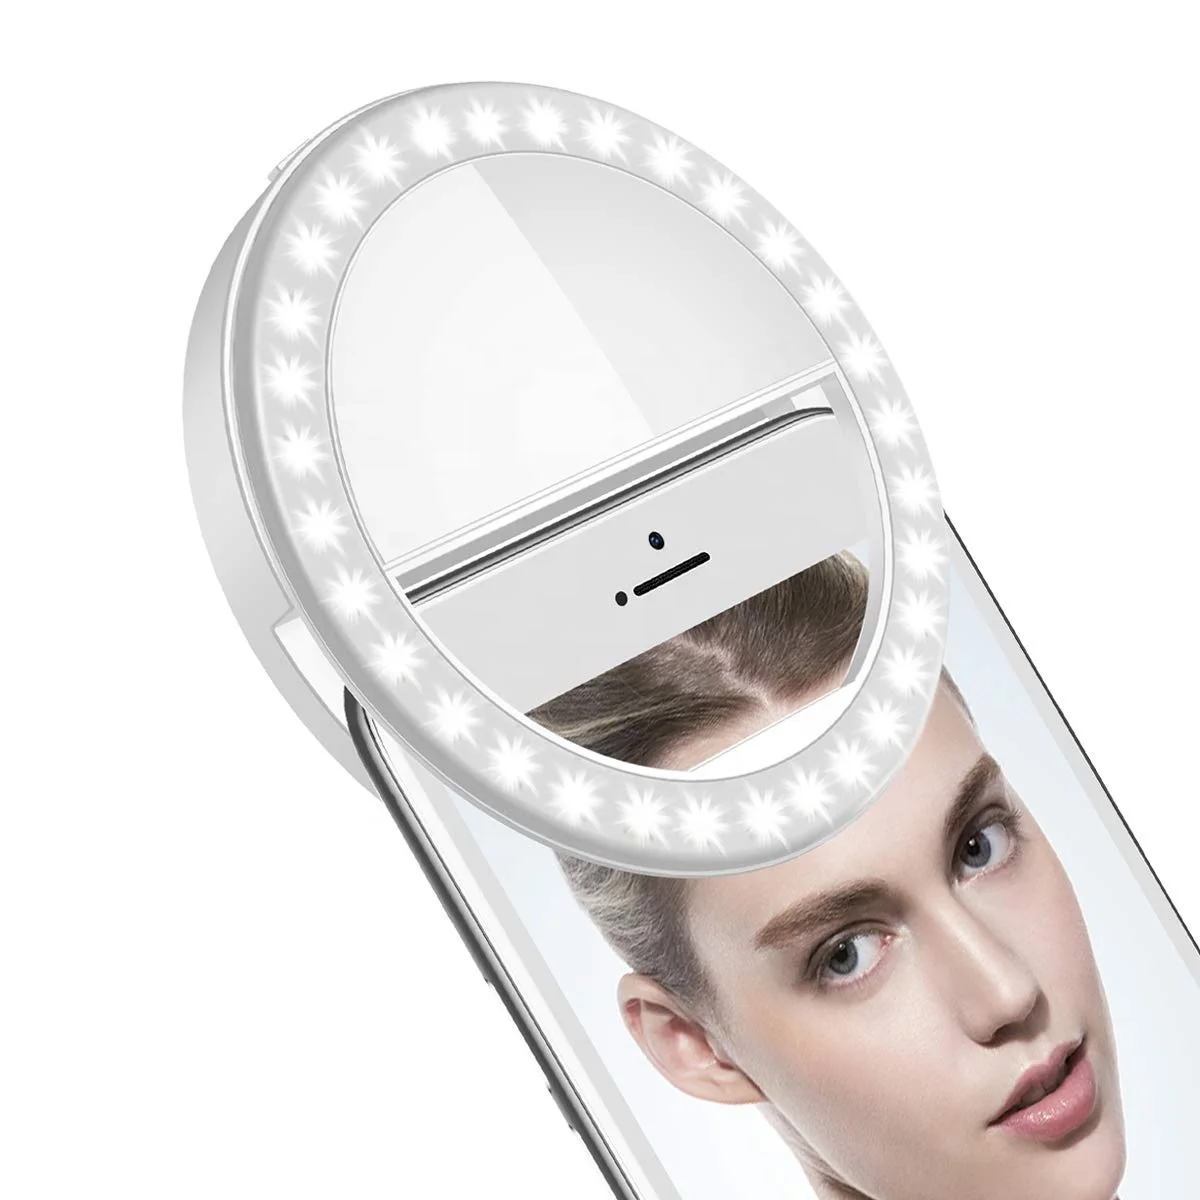 Mobile Phone USB makeup support rechargeable 36 led mobile phone flash selfie ring light For Beauty Photos